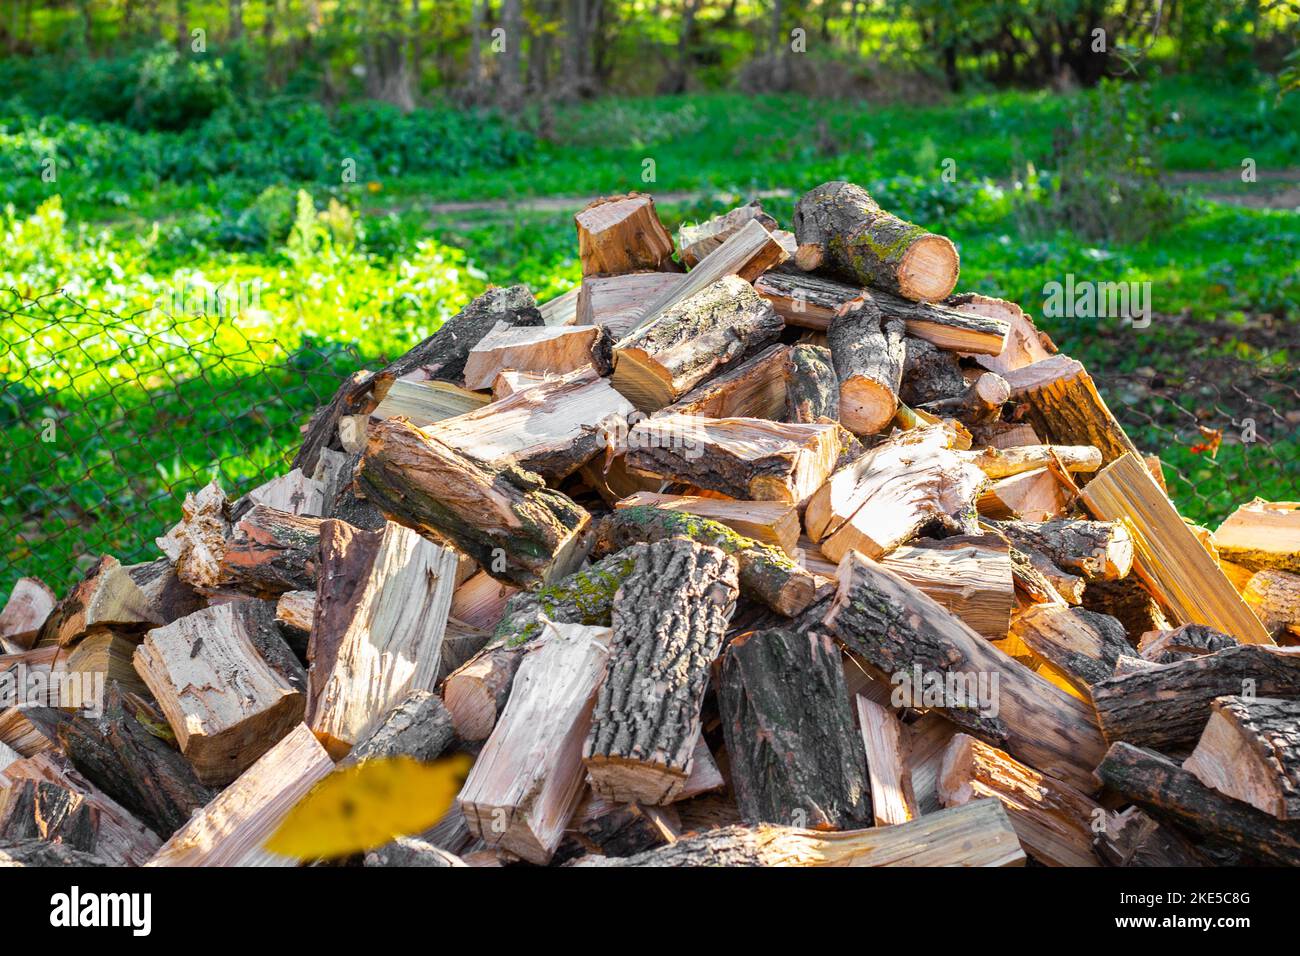 A pile of firewood in the yard, harvested for heating the house in the winter. Stock Photo